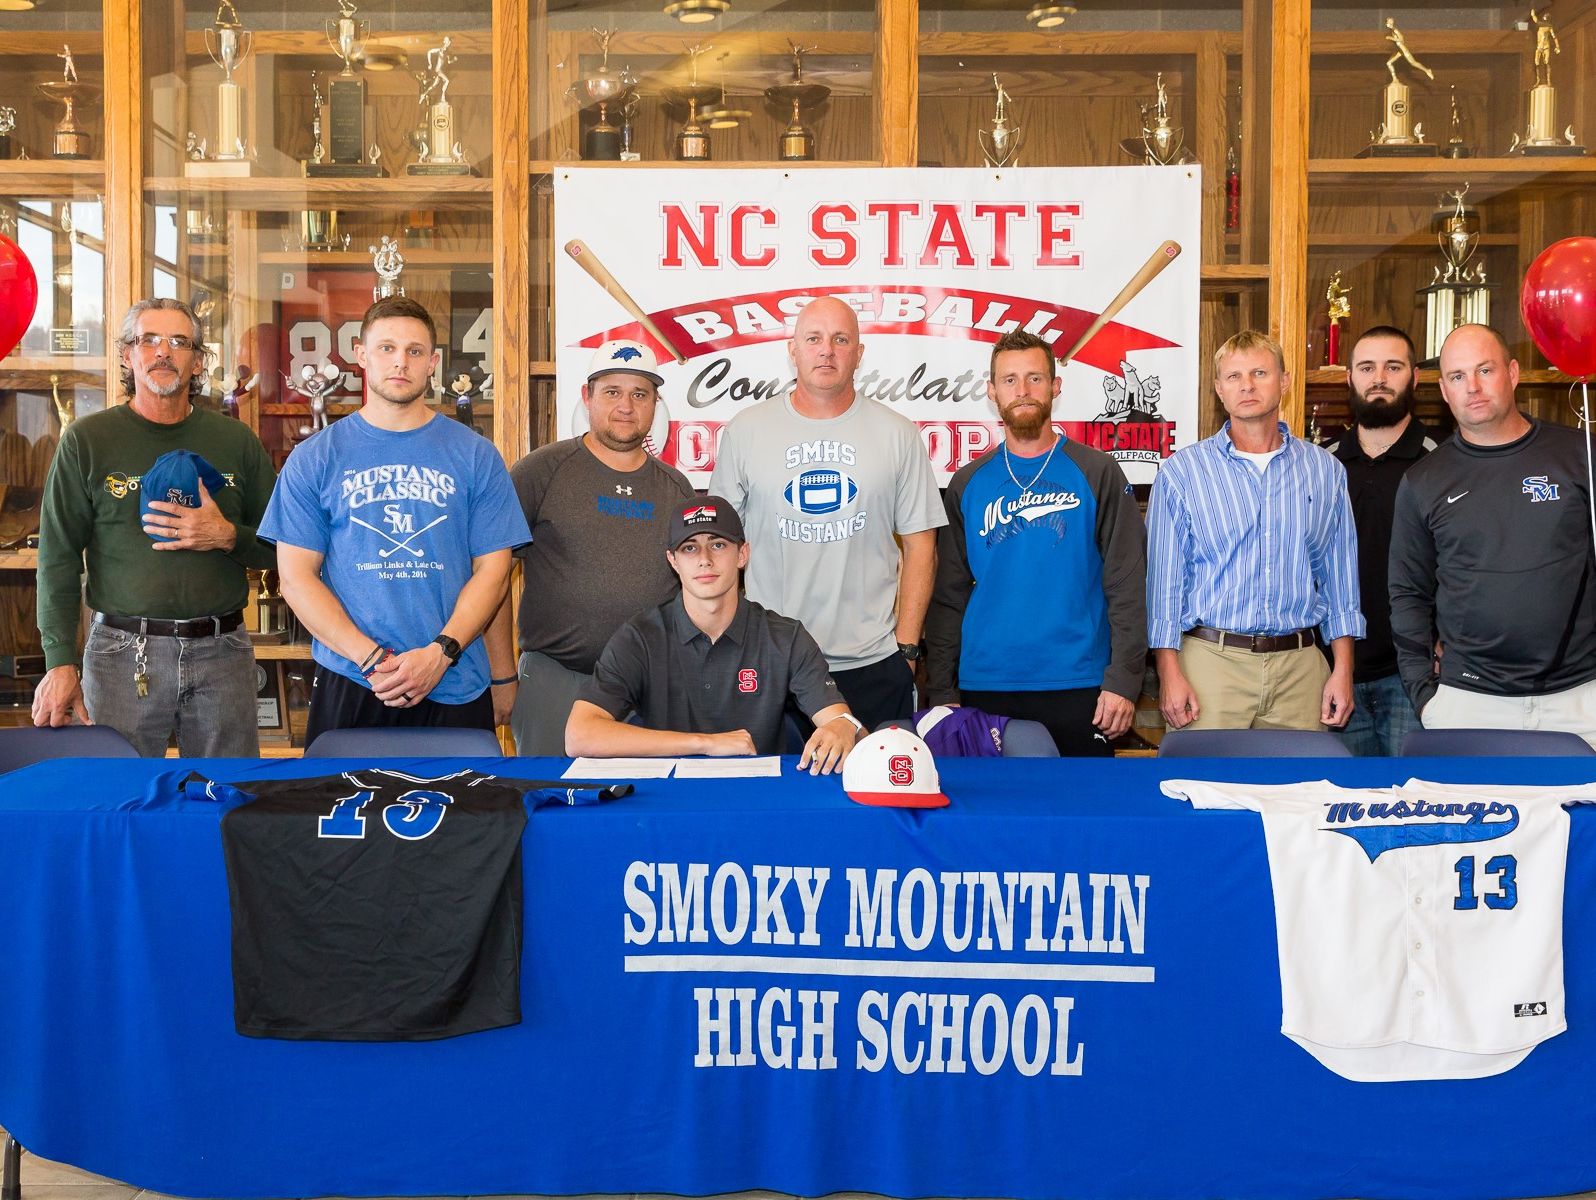 Smoky Mountain senior Cole Hooper has signed to play college baseball for N.C. State.